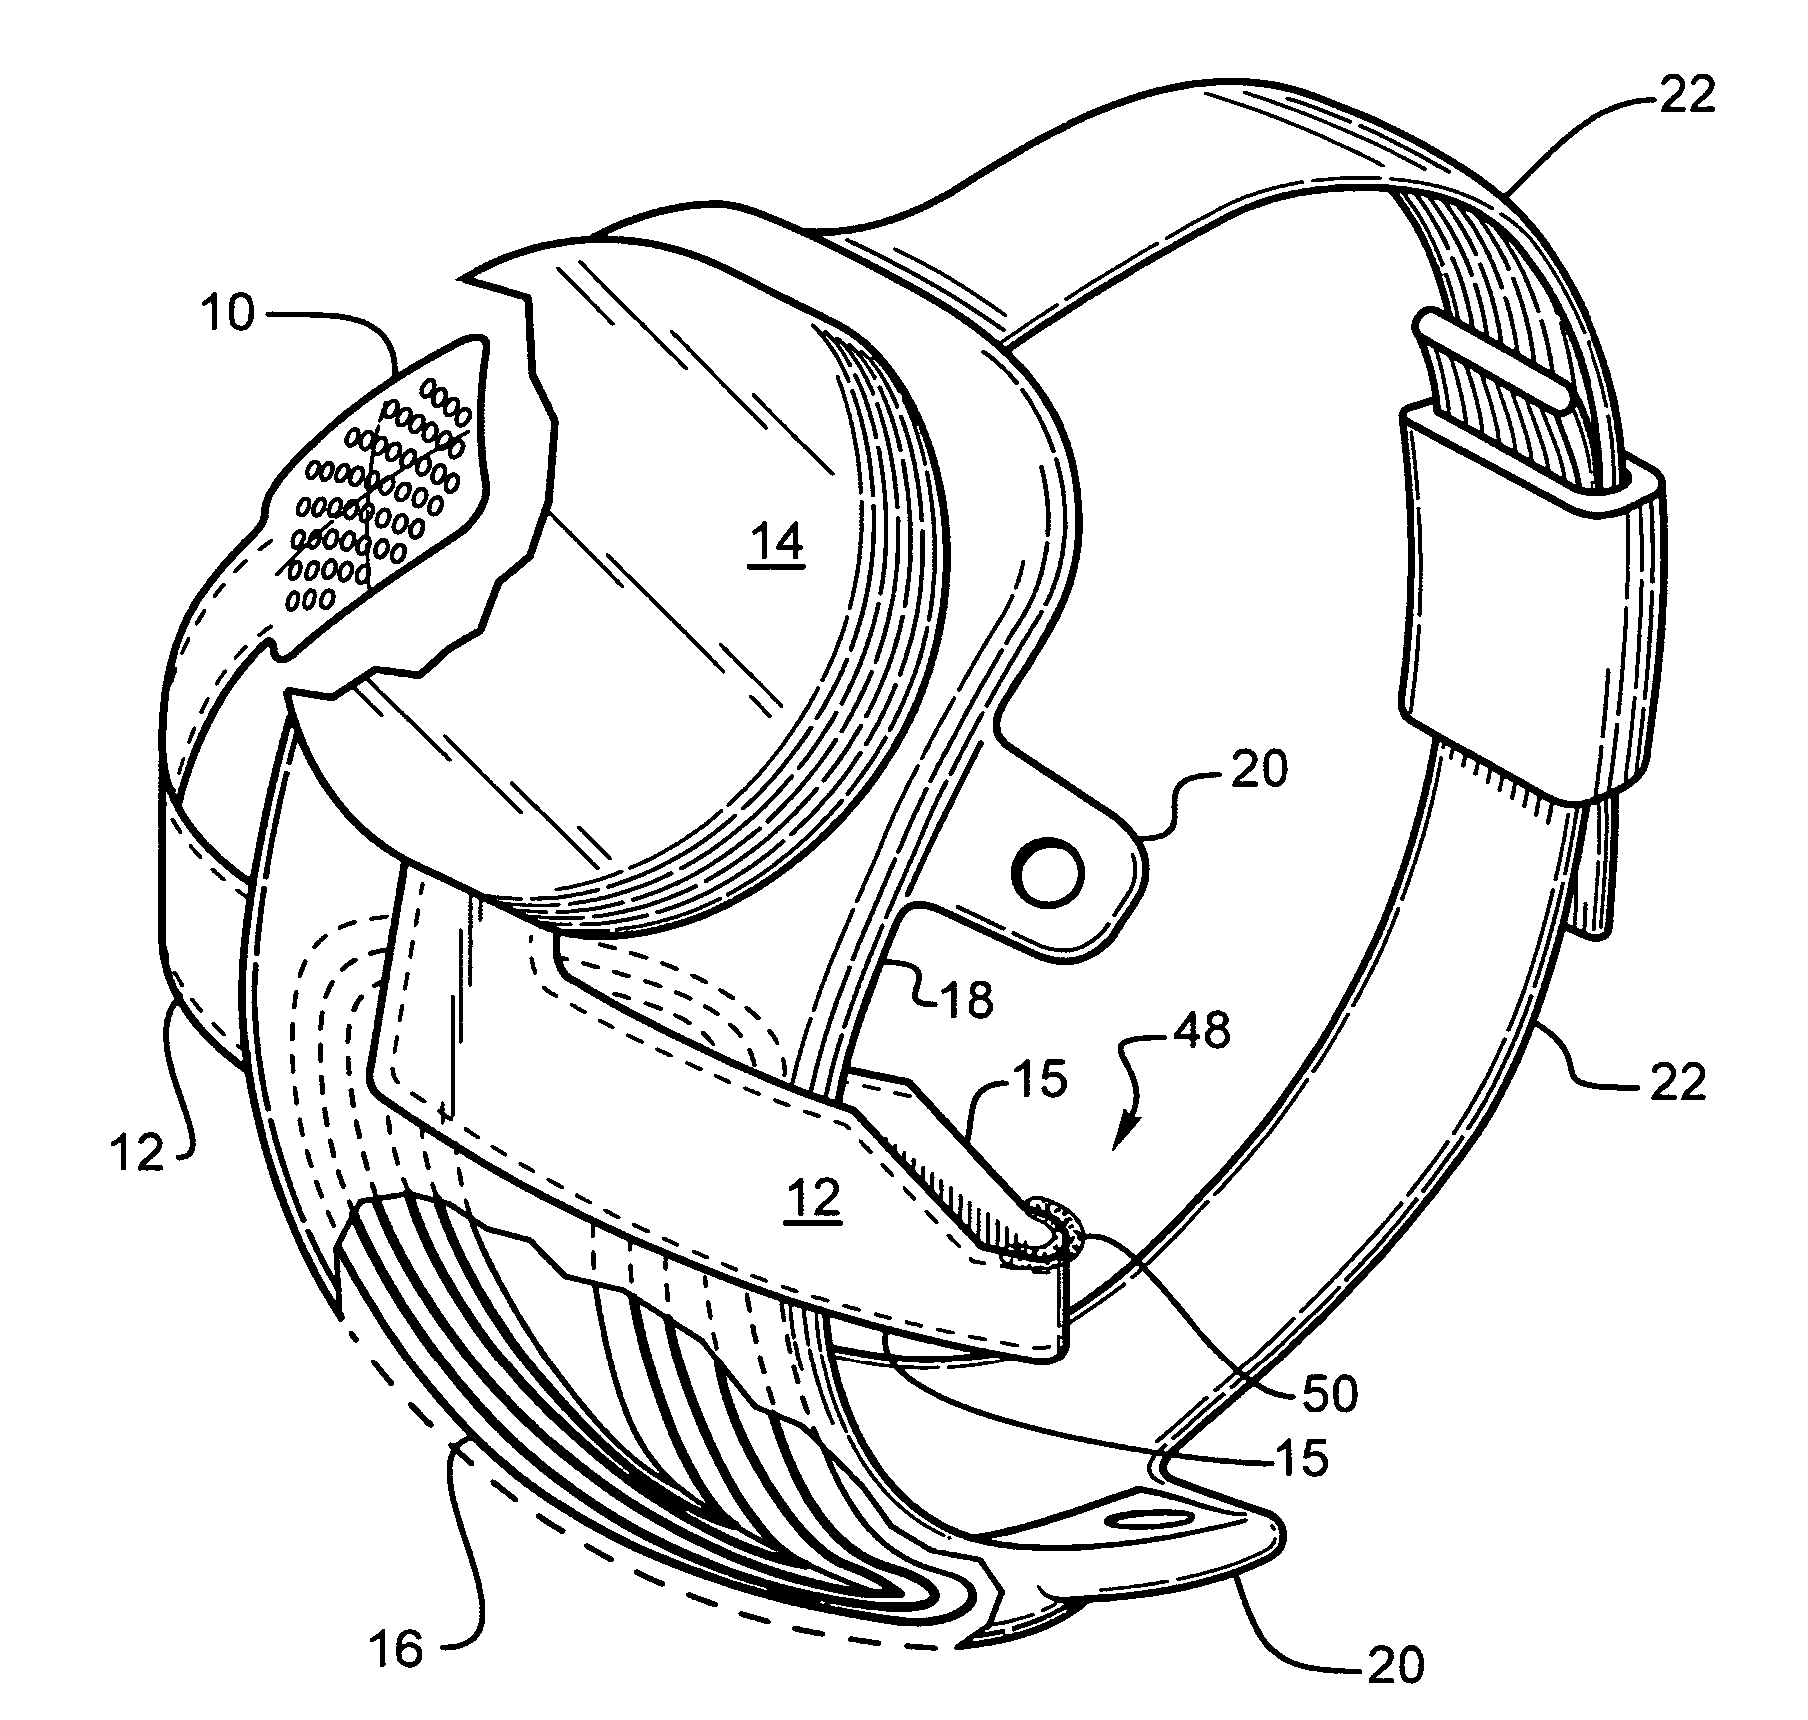 Retinal prosthesis and method of manufacturing a retinal prosthesis